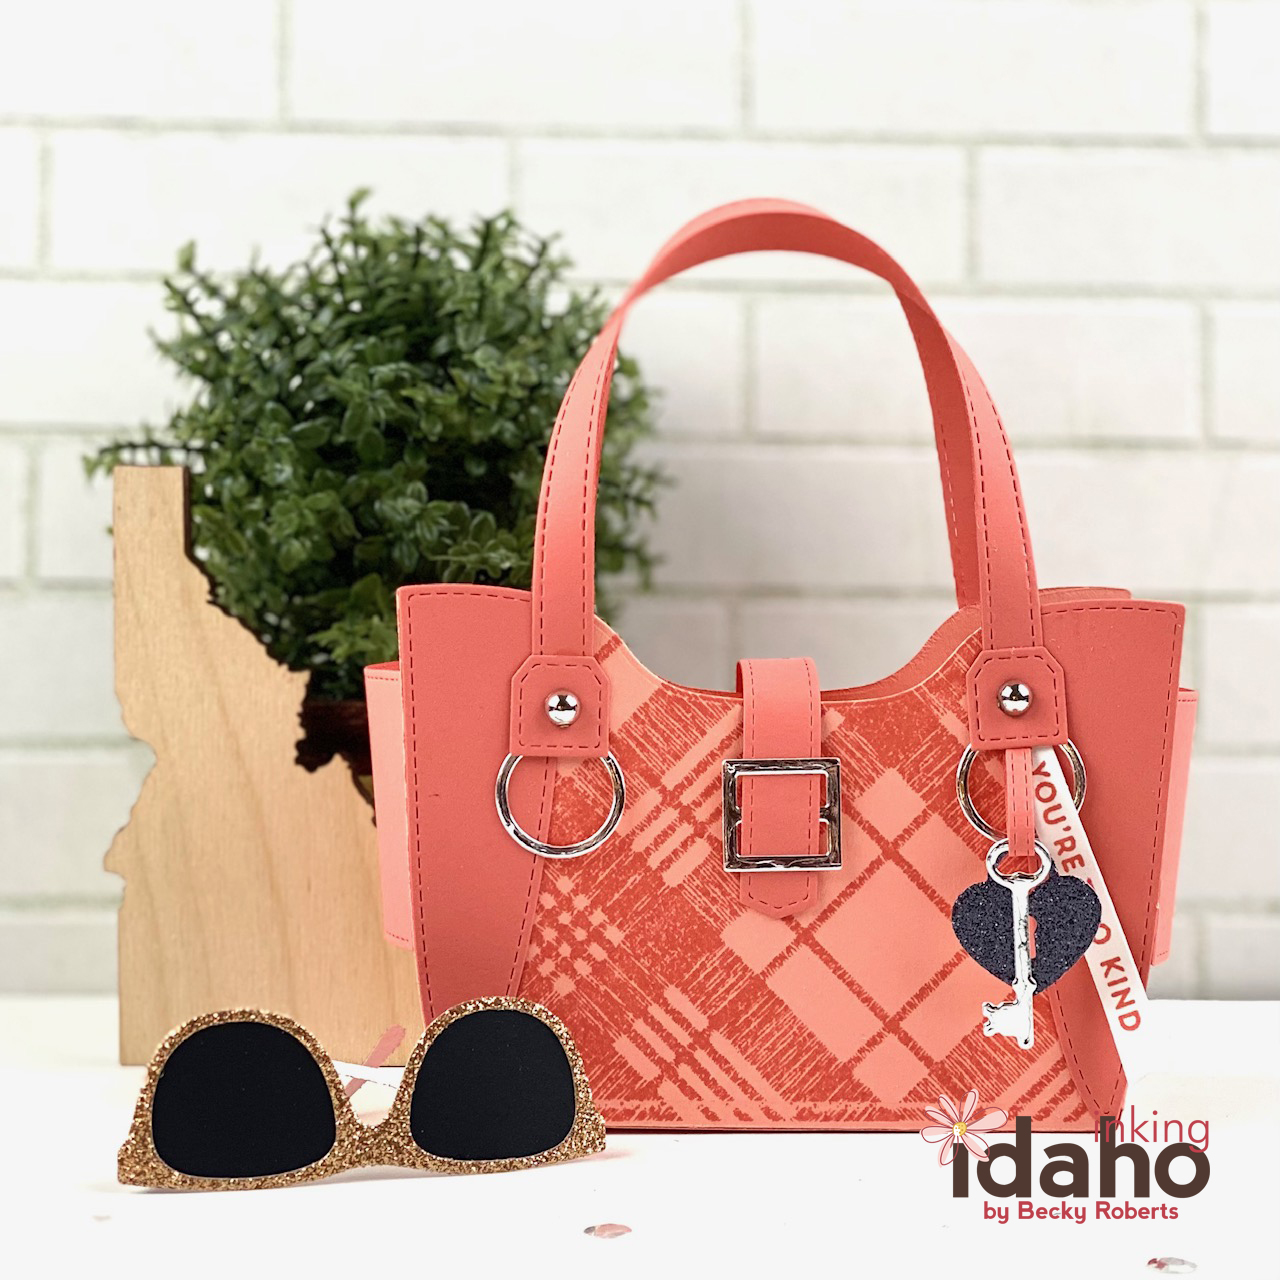 Inking Idaho: Introducing The Weekender Handbag - My Latest Collaboration  With Concord & 9th!